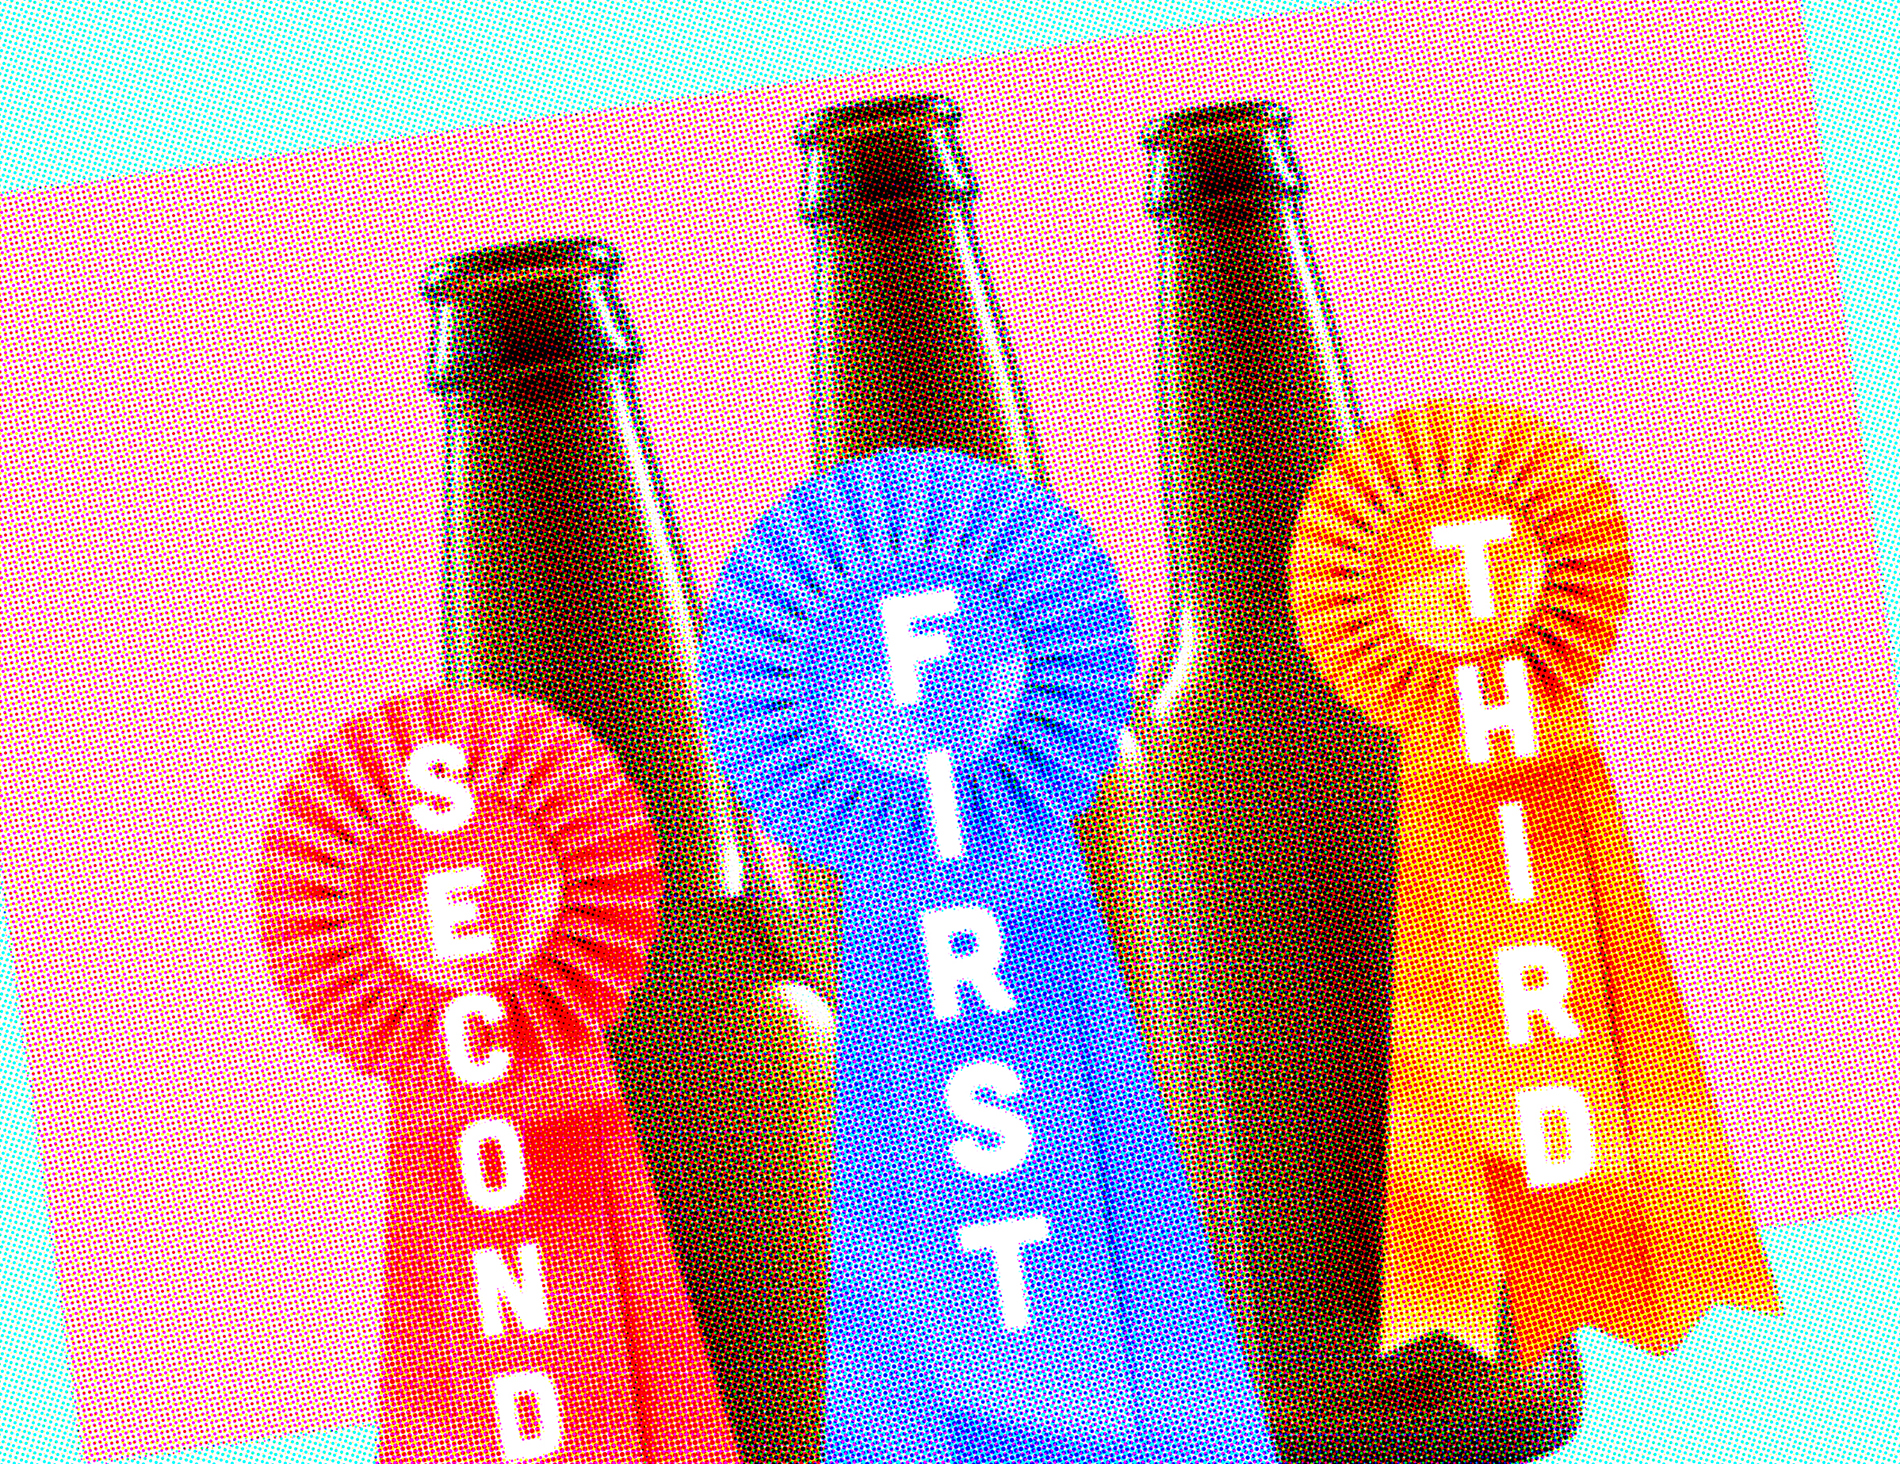 And The Winning Beer Label Is …